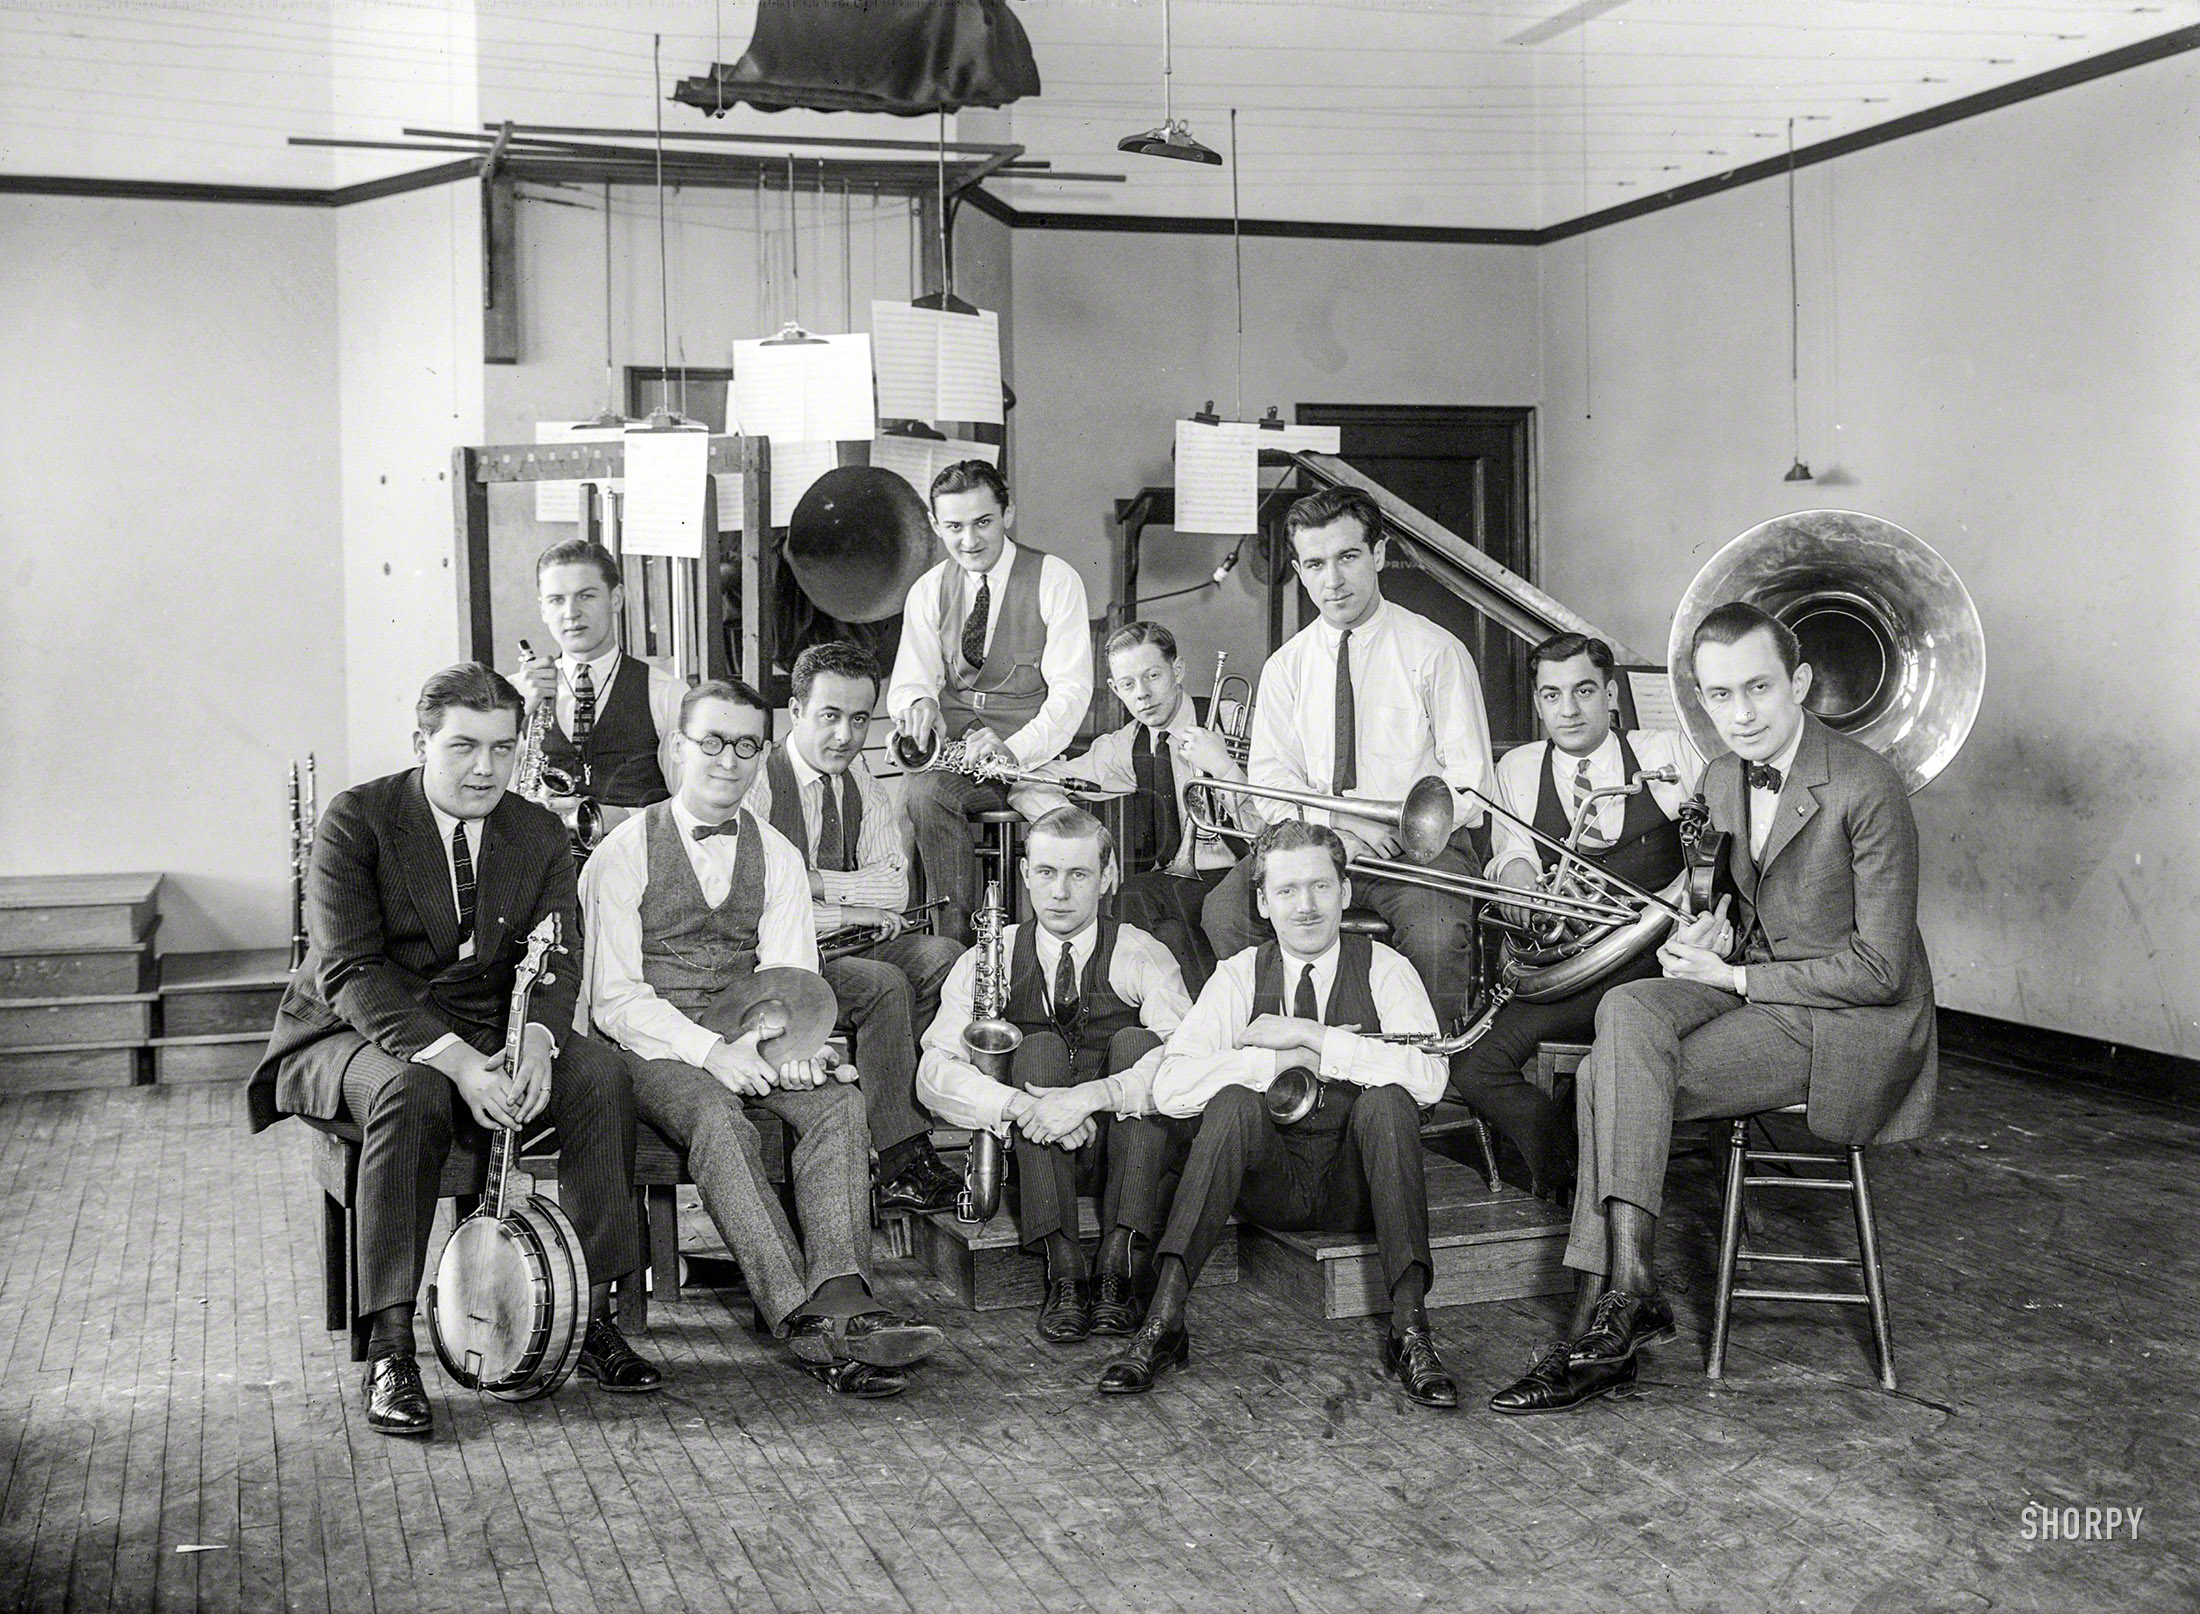 New York circa 1922. "Paul Specht band." Last seen at the Astor Roof Garden, and now in the recording studio also seen here. Note arrangement of the scores around the acoustic recording horn. 5x7 glass negative. View full size.